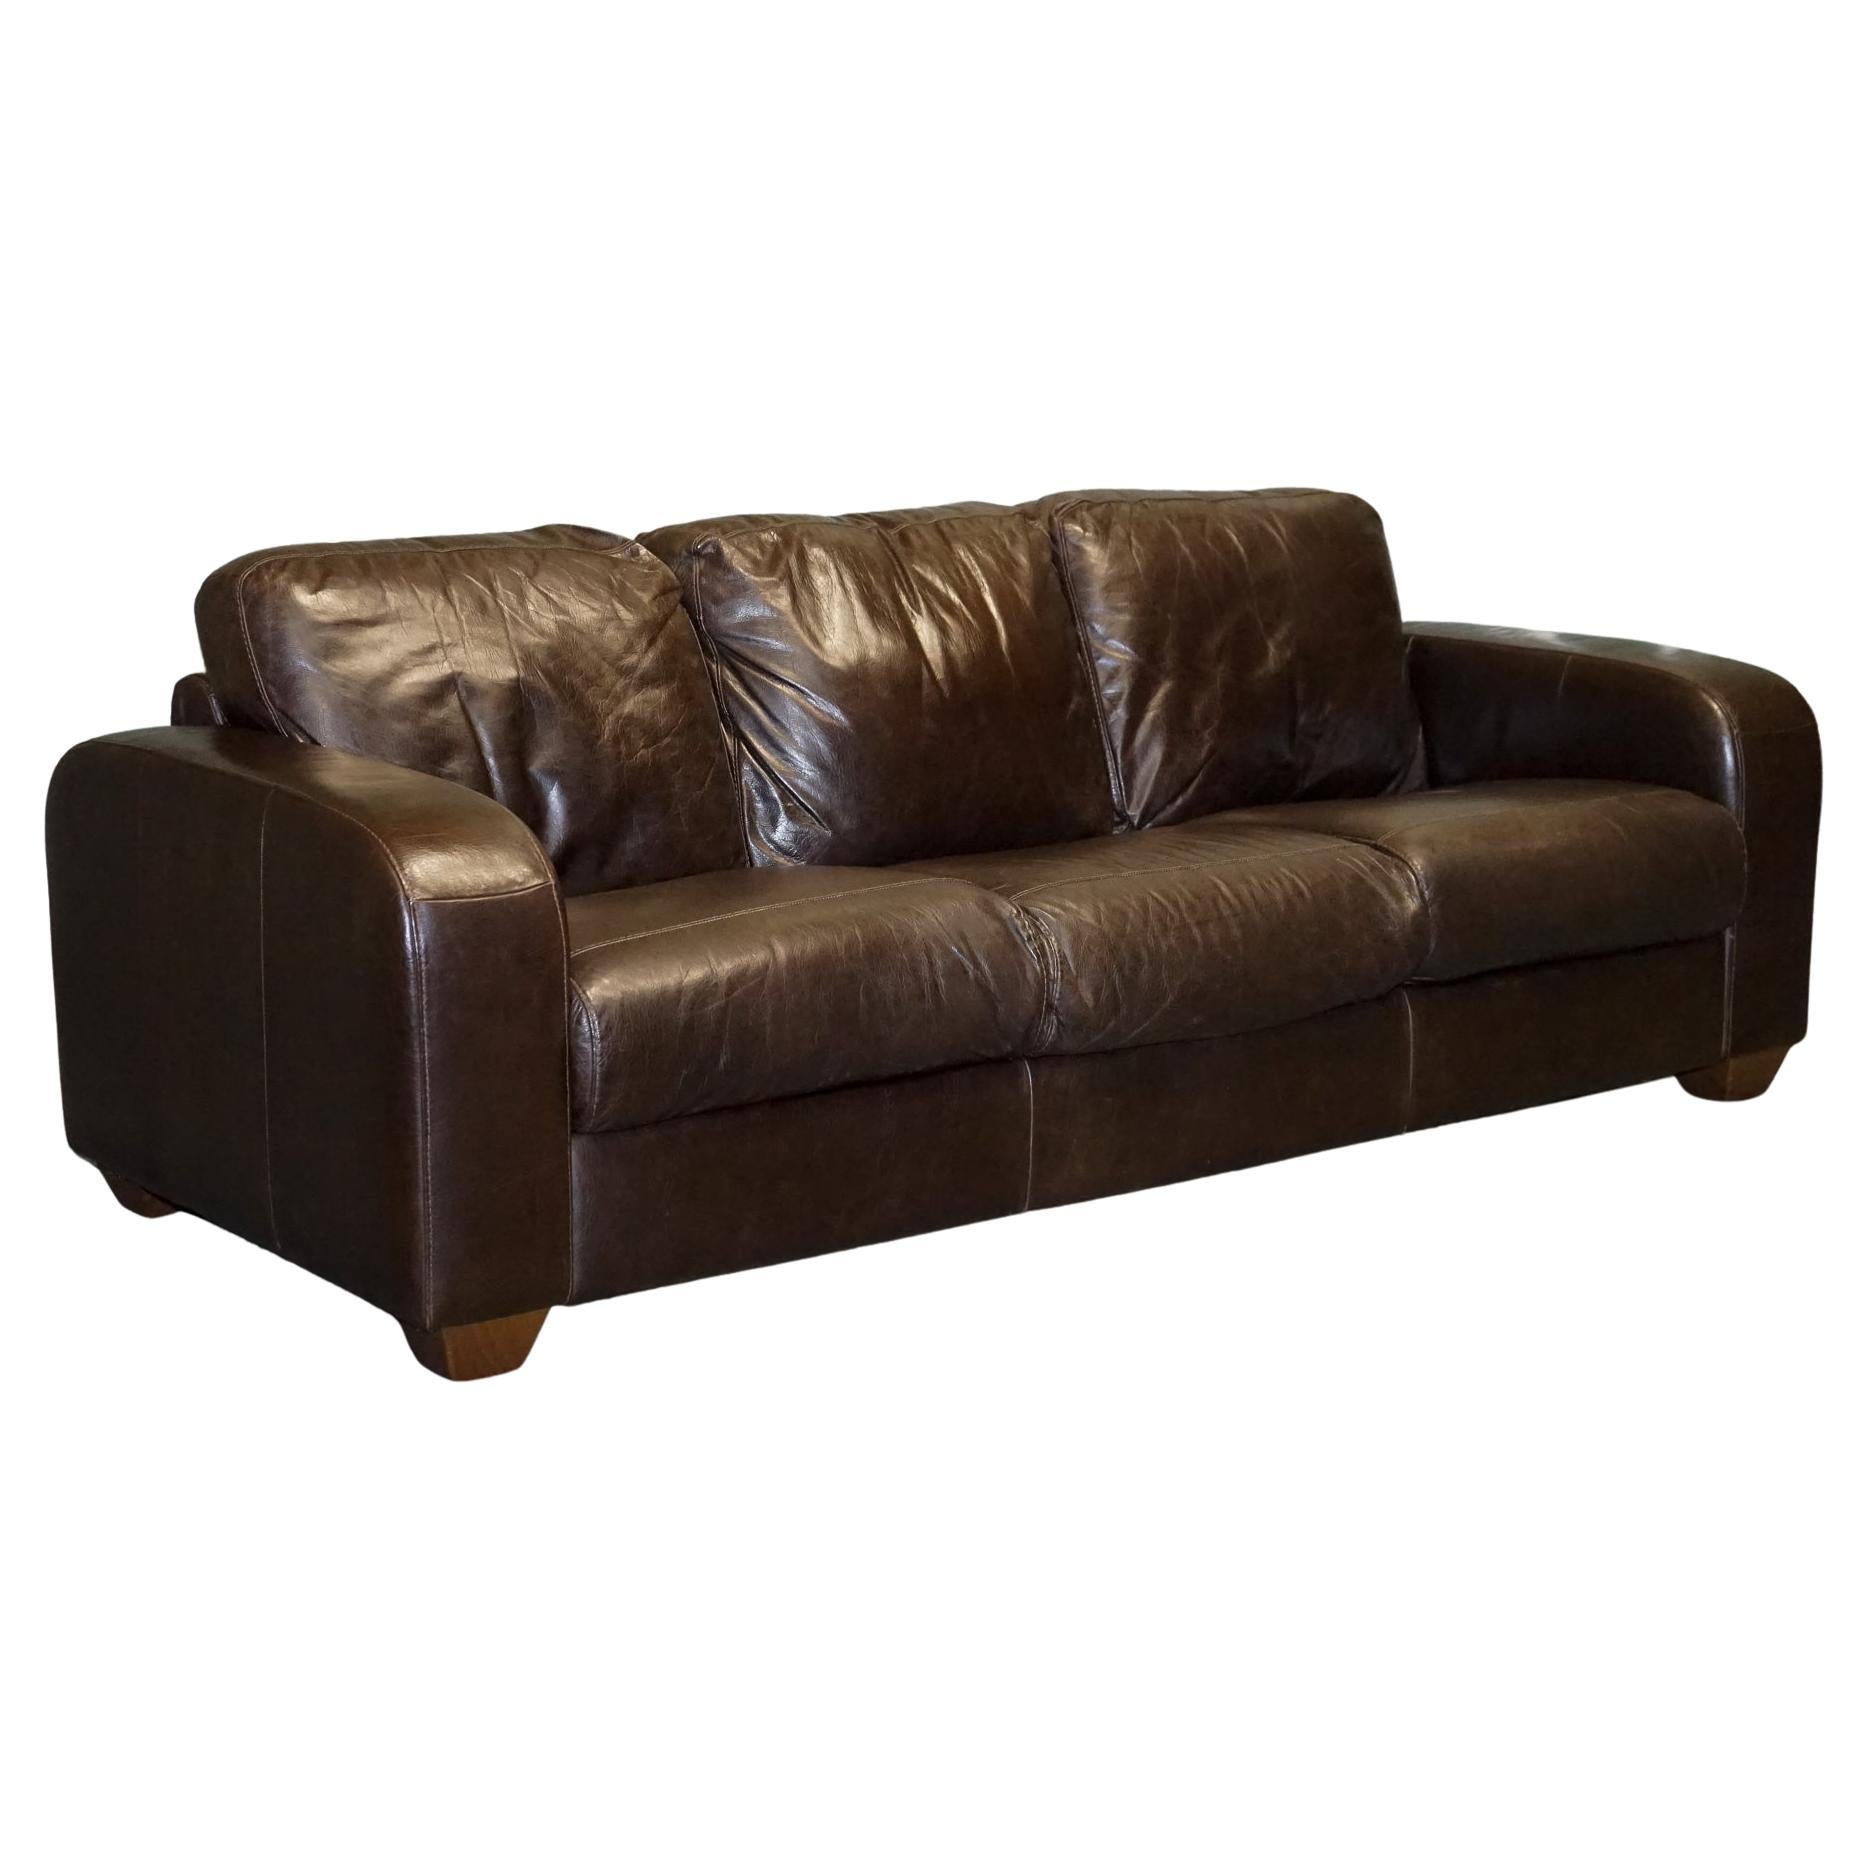 STUNNING VINTAGE CHOCOLATE BROWN LEATHER THREE SEATER SOFA BY SOFITALiA For Sale